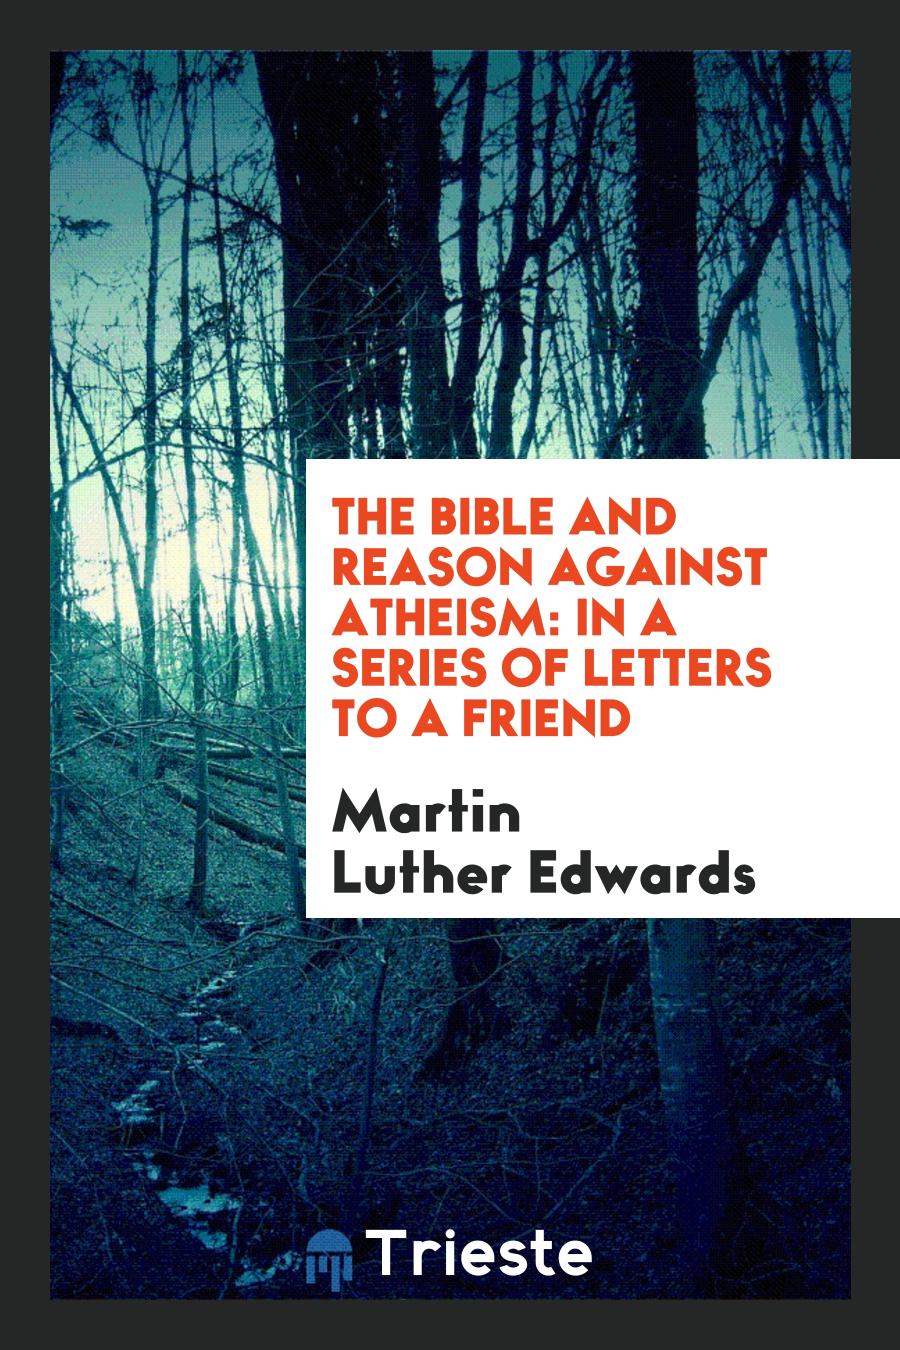 The Bible and Reason Against Atheism: In a Series of Letters to a Friend